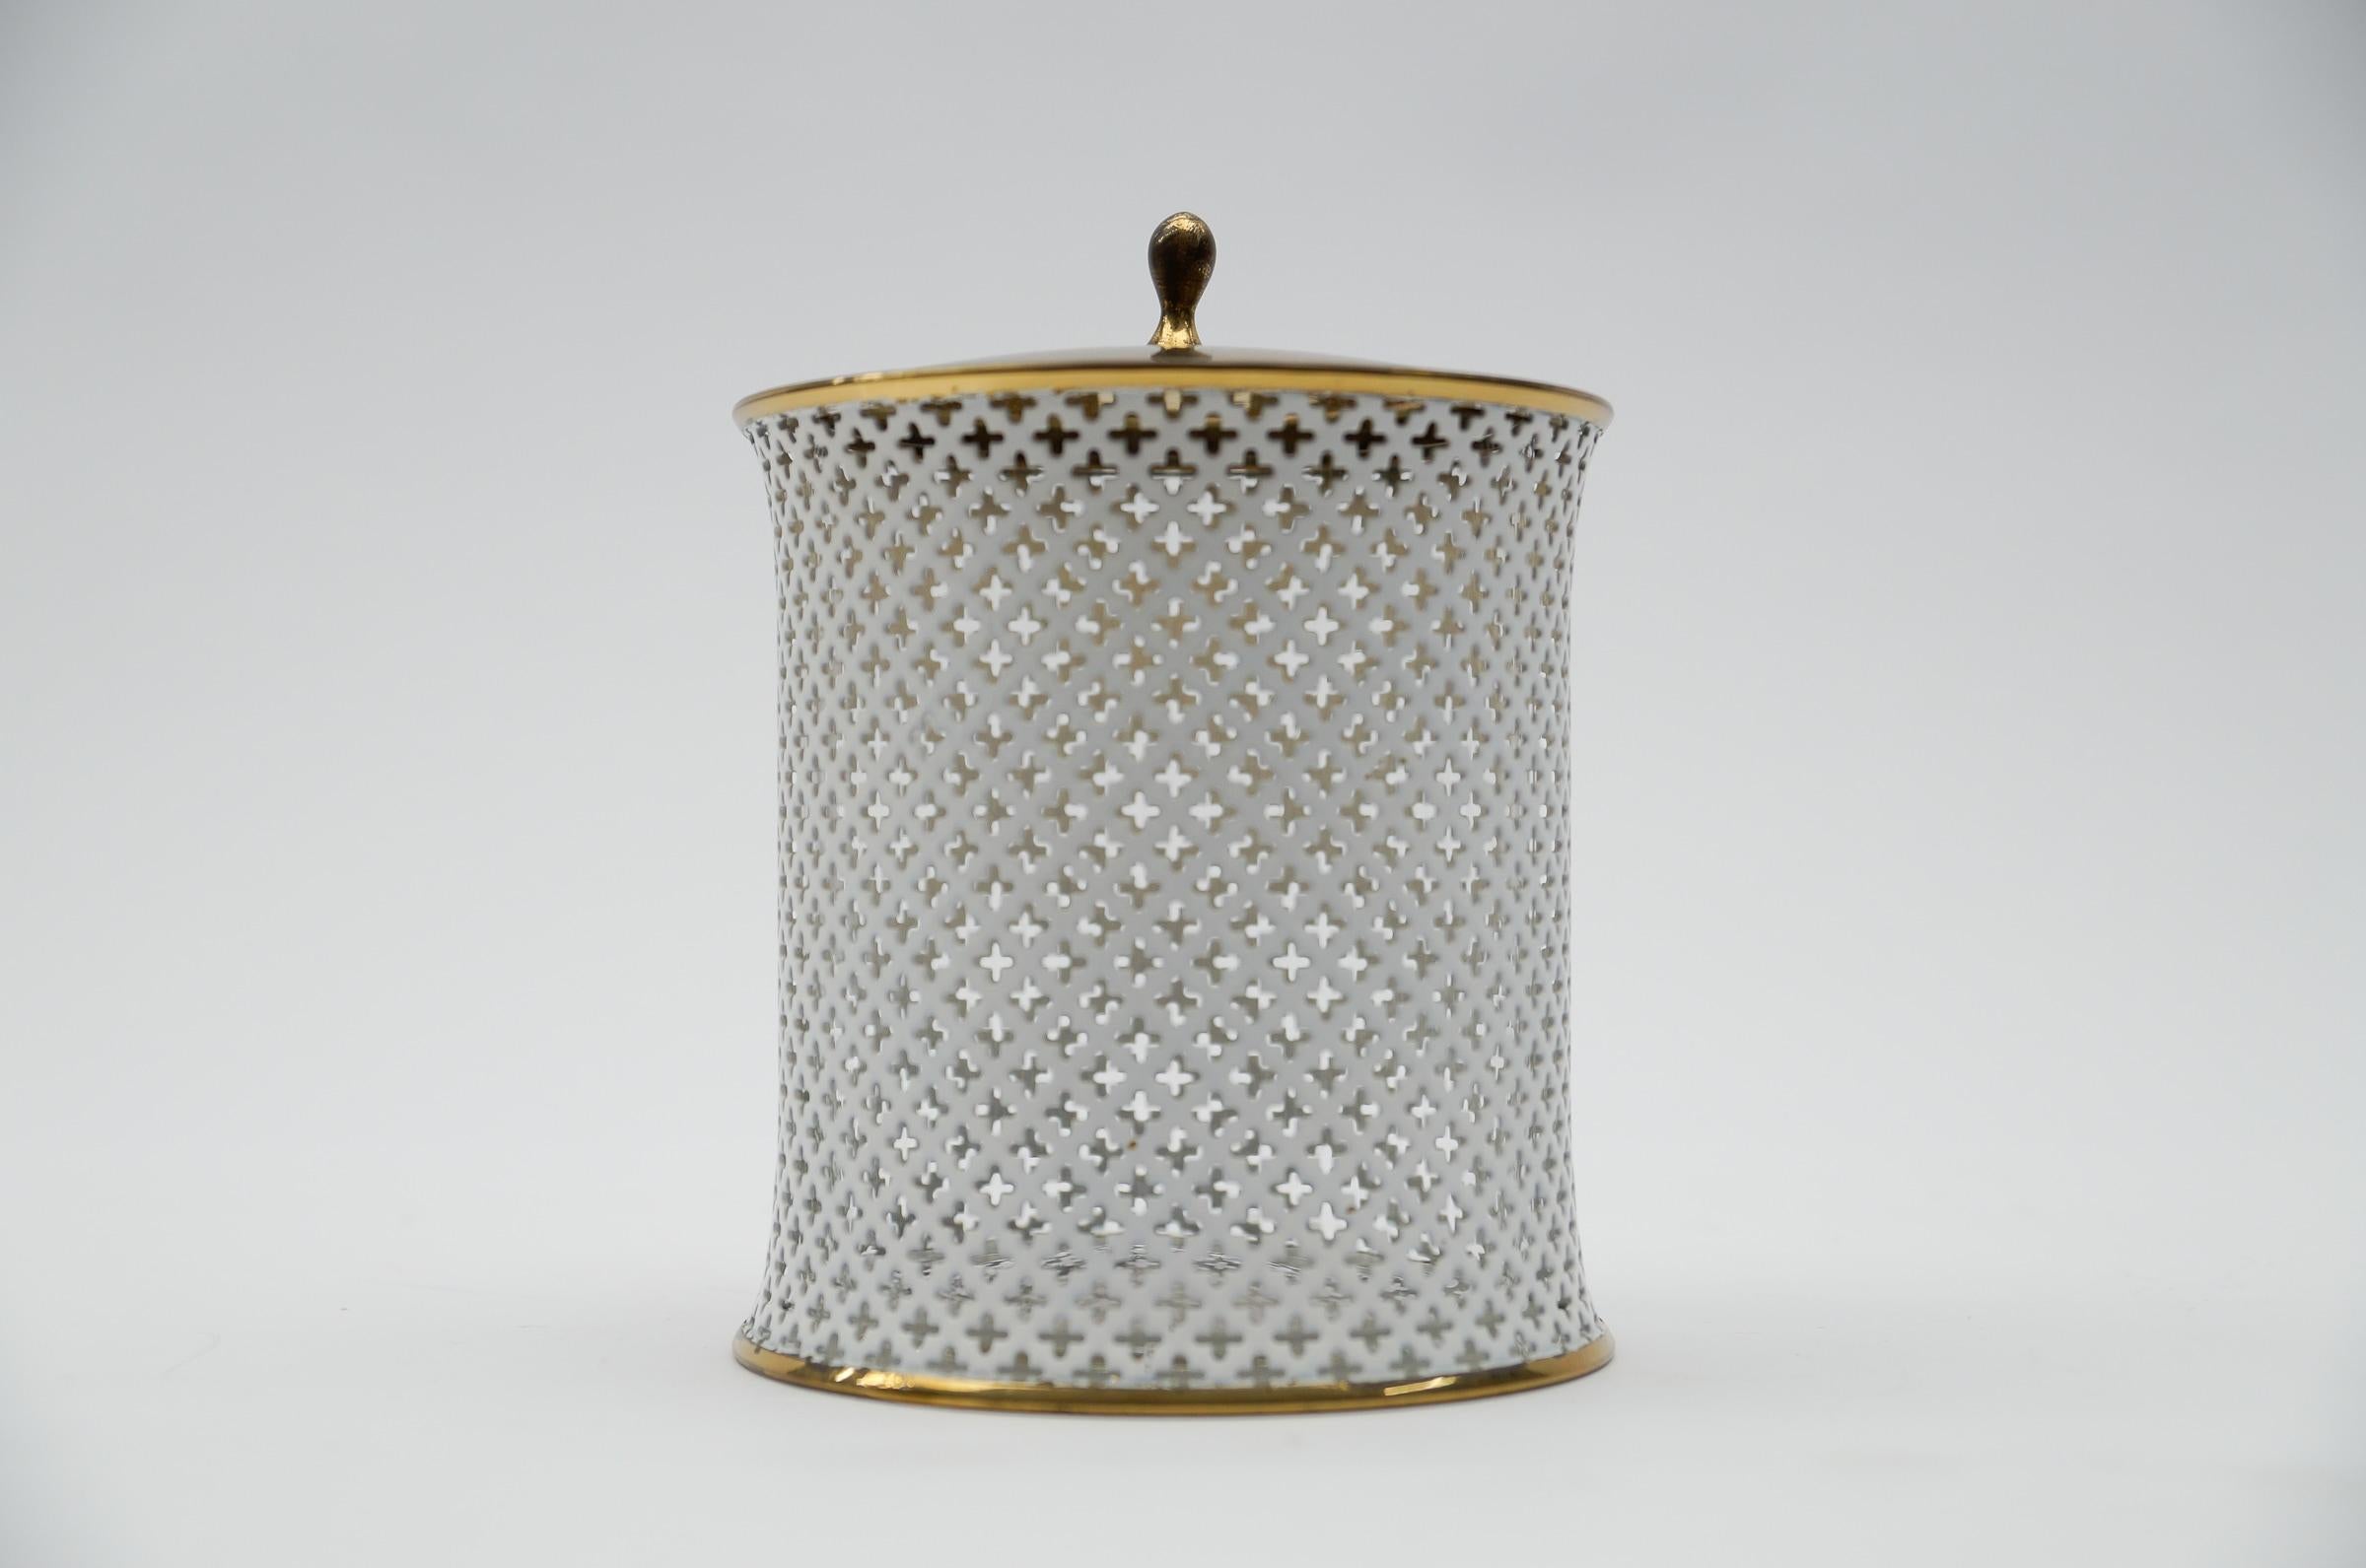 Stylish perforated metal, brass and glass mategot style cosmetic lidded tin, 1950s